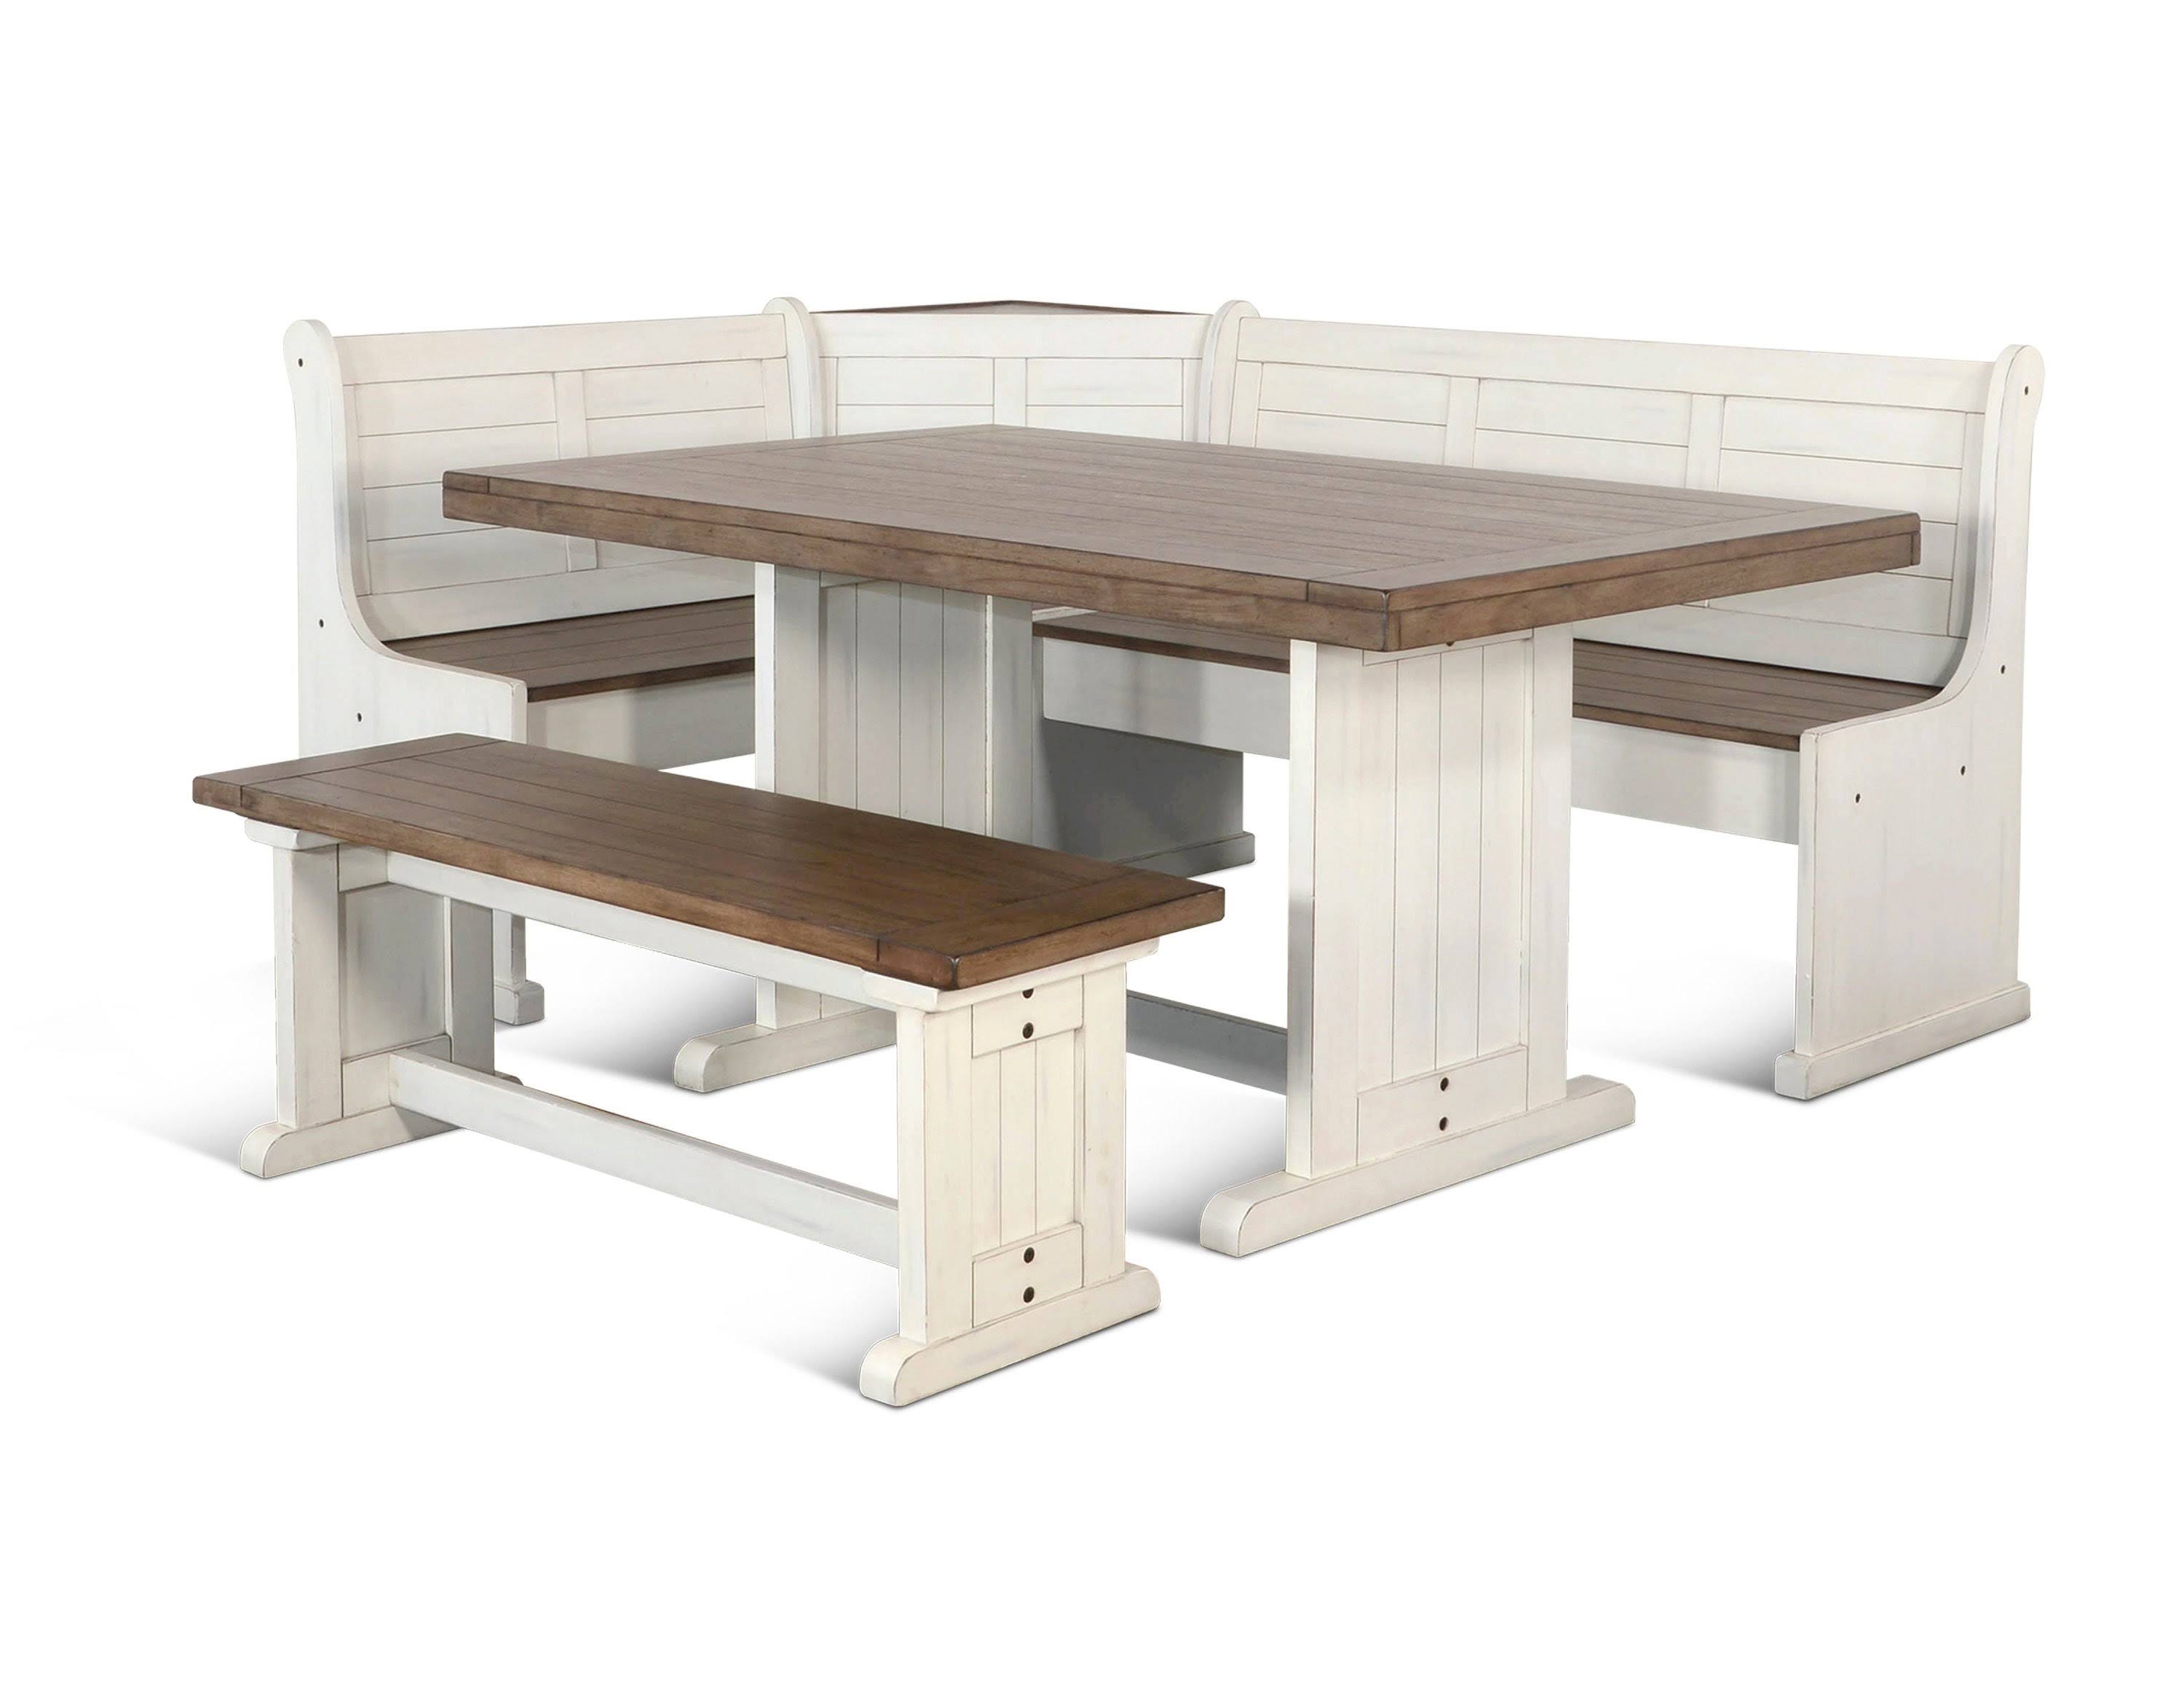 Wood Dining Set - Breakfast Nook with Versatile Storage Benches (0113MB) | Image